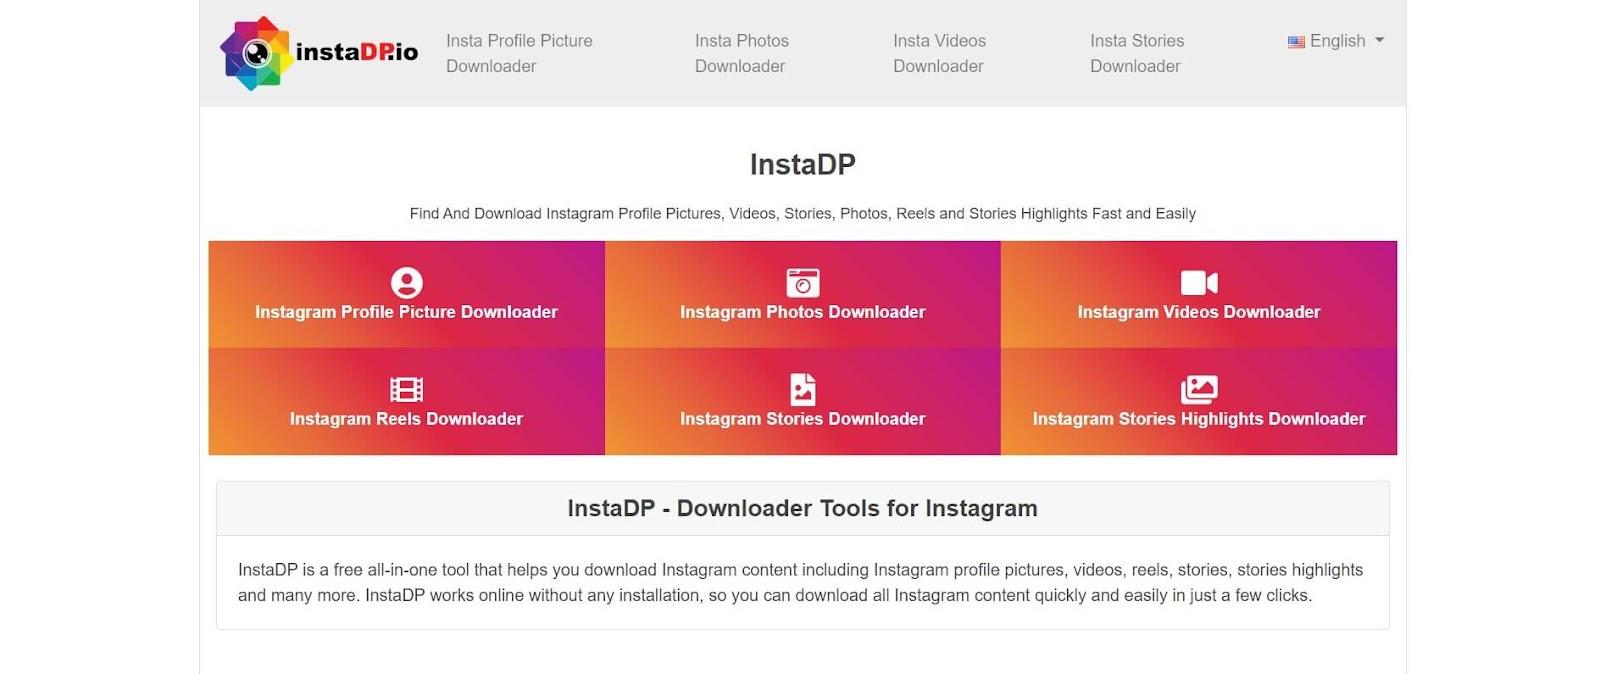 Instadp: Watch and Download Instagram Reels and Stories